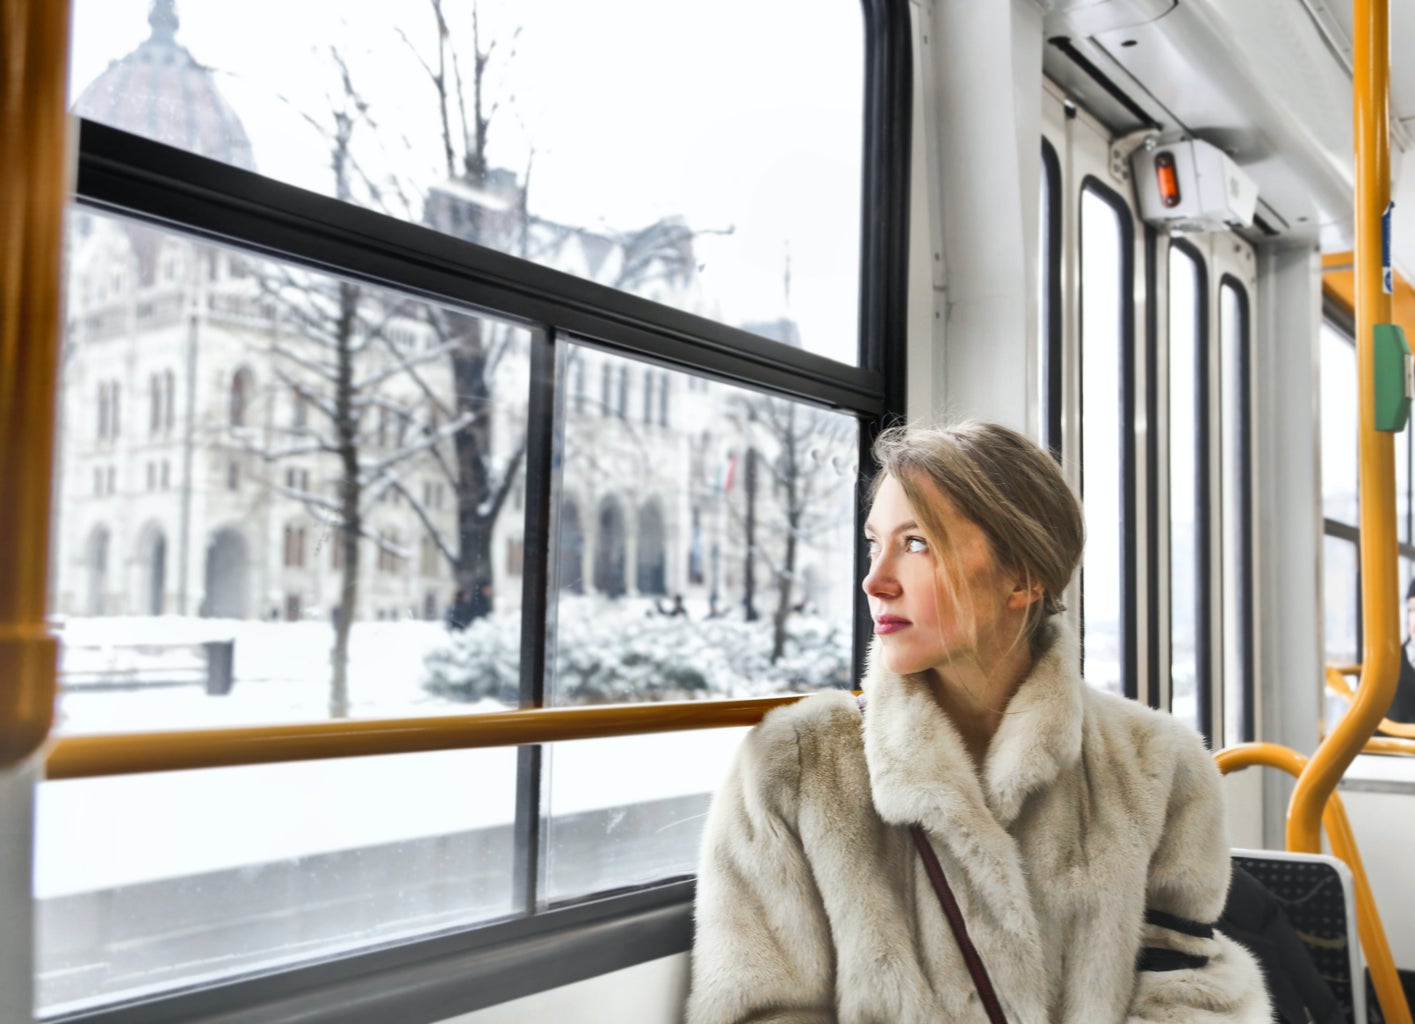 Woman looks out the bus window at the snow outside.